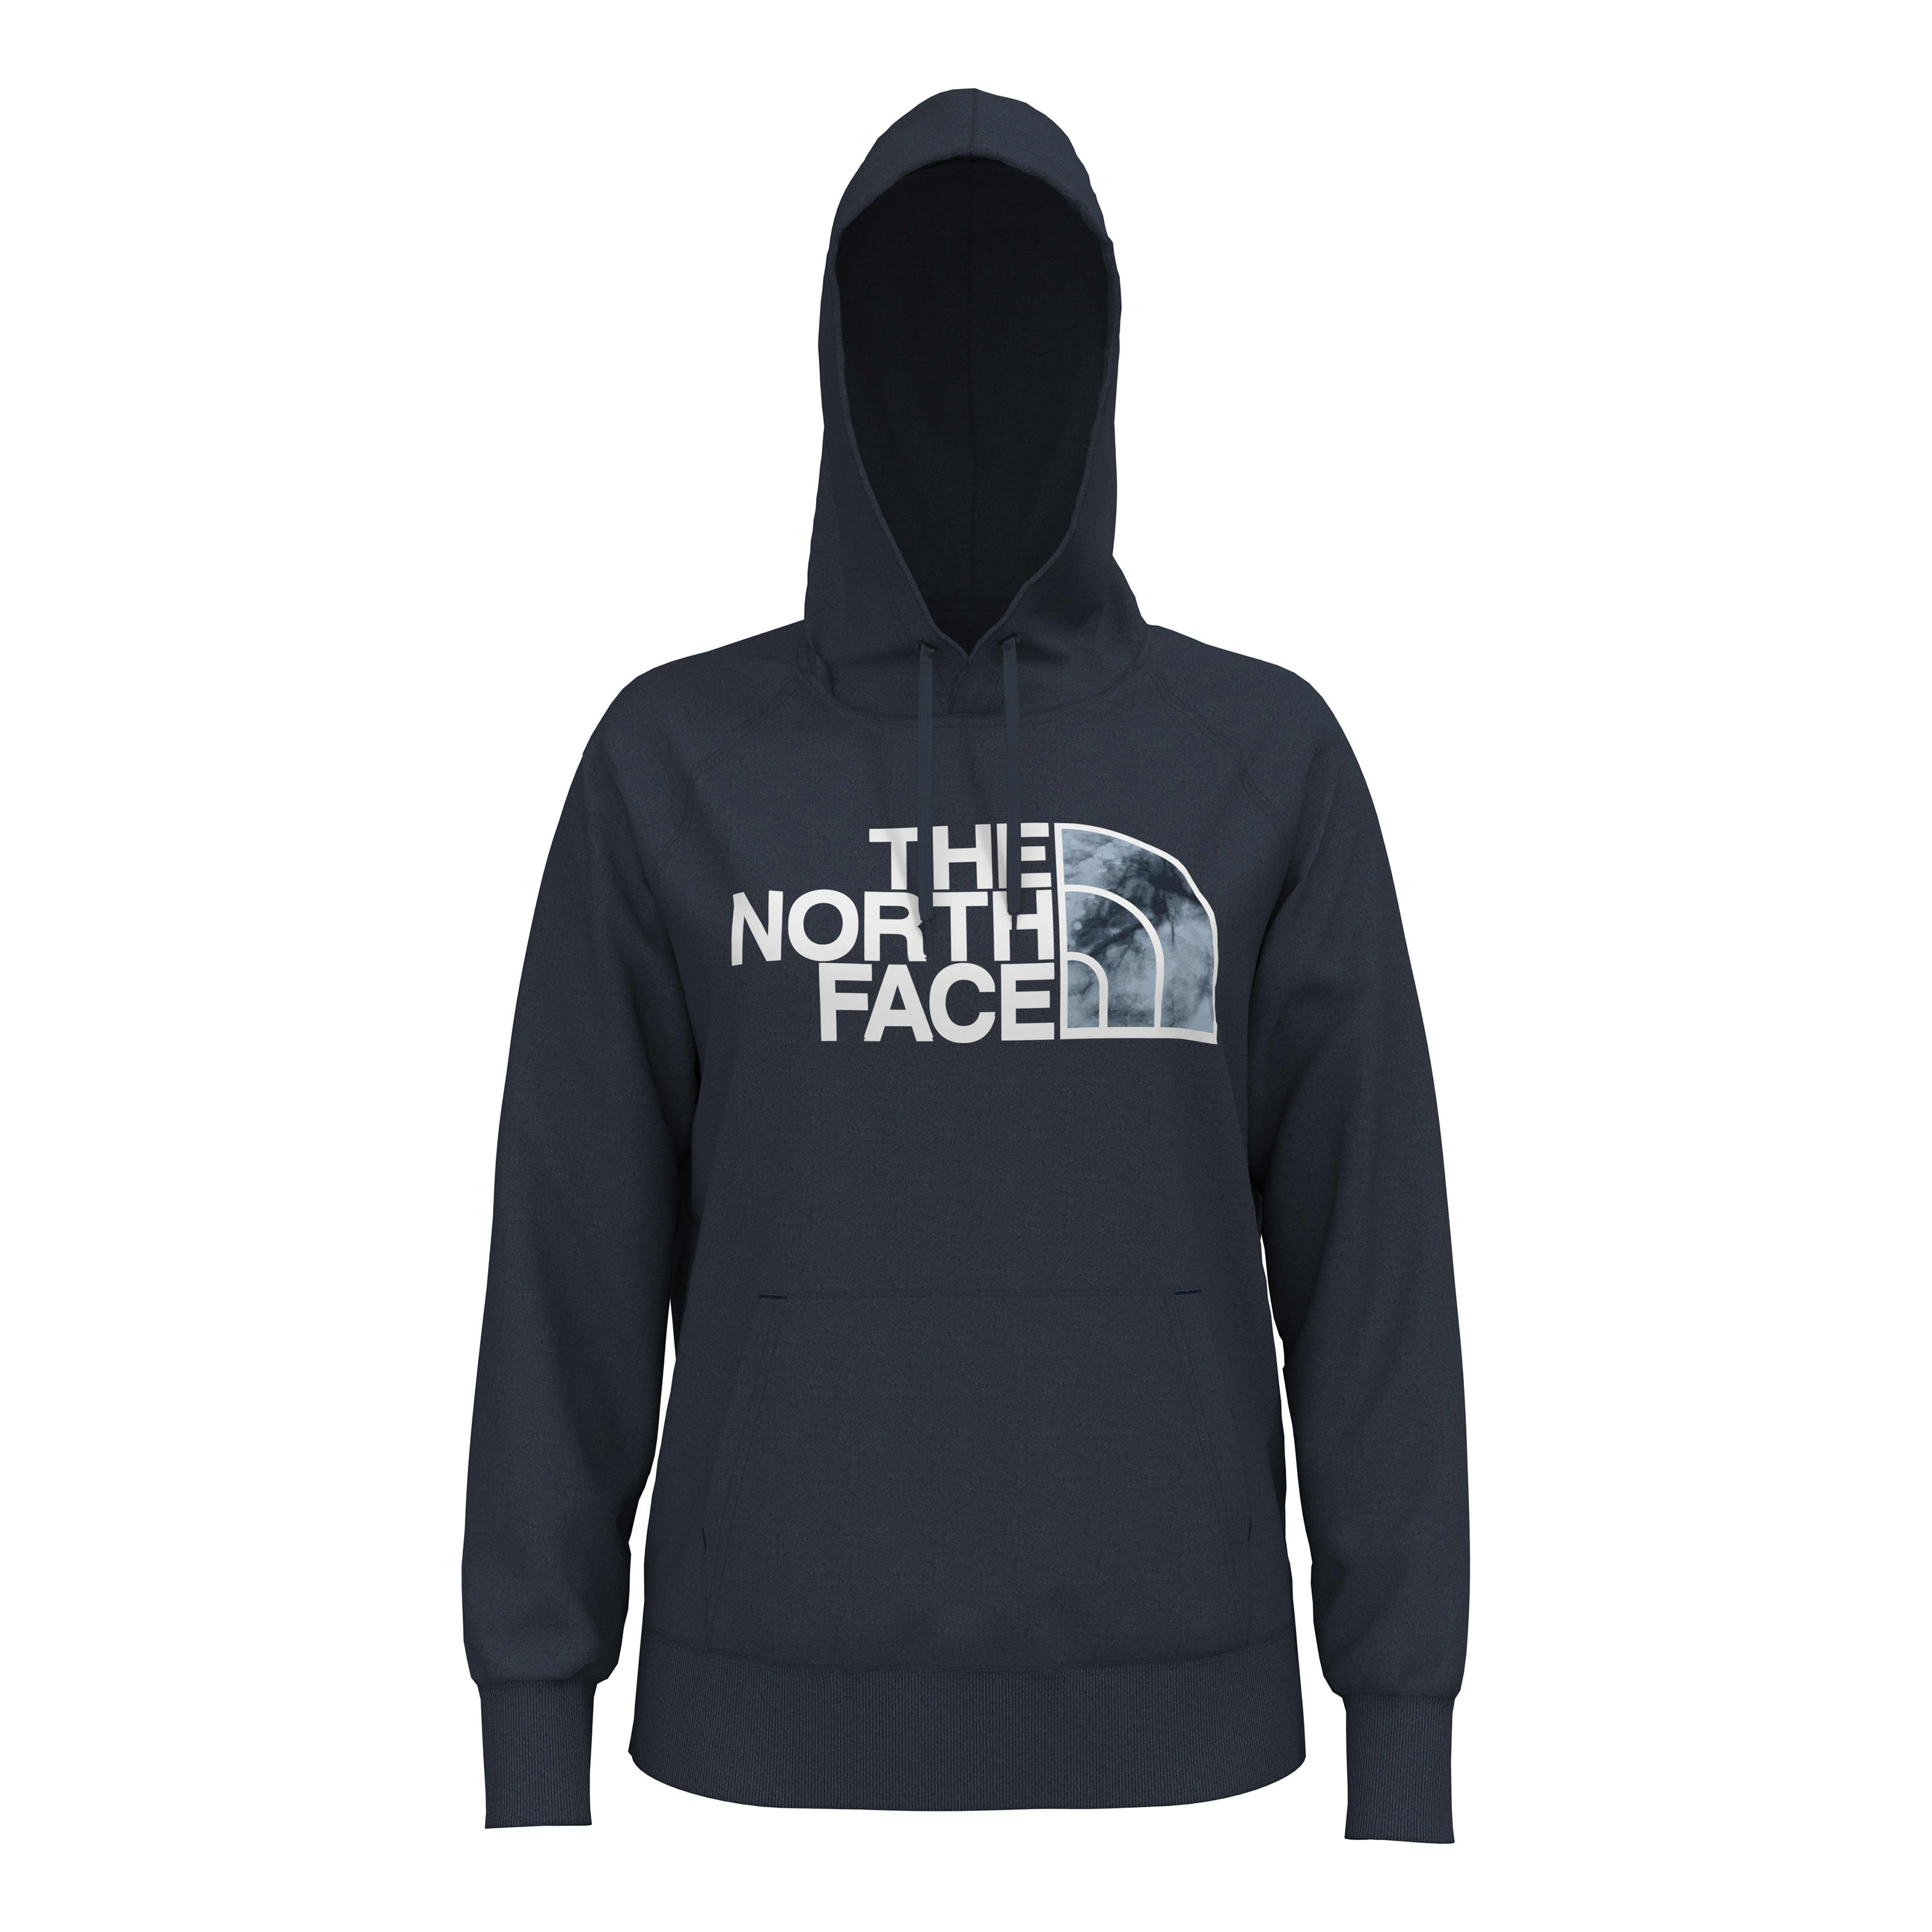 The North Face® Women’s Half Dome Hoodie - Aviator Navy